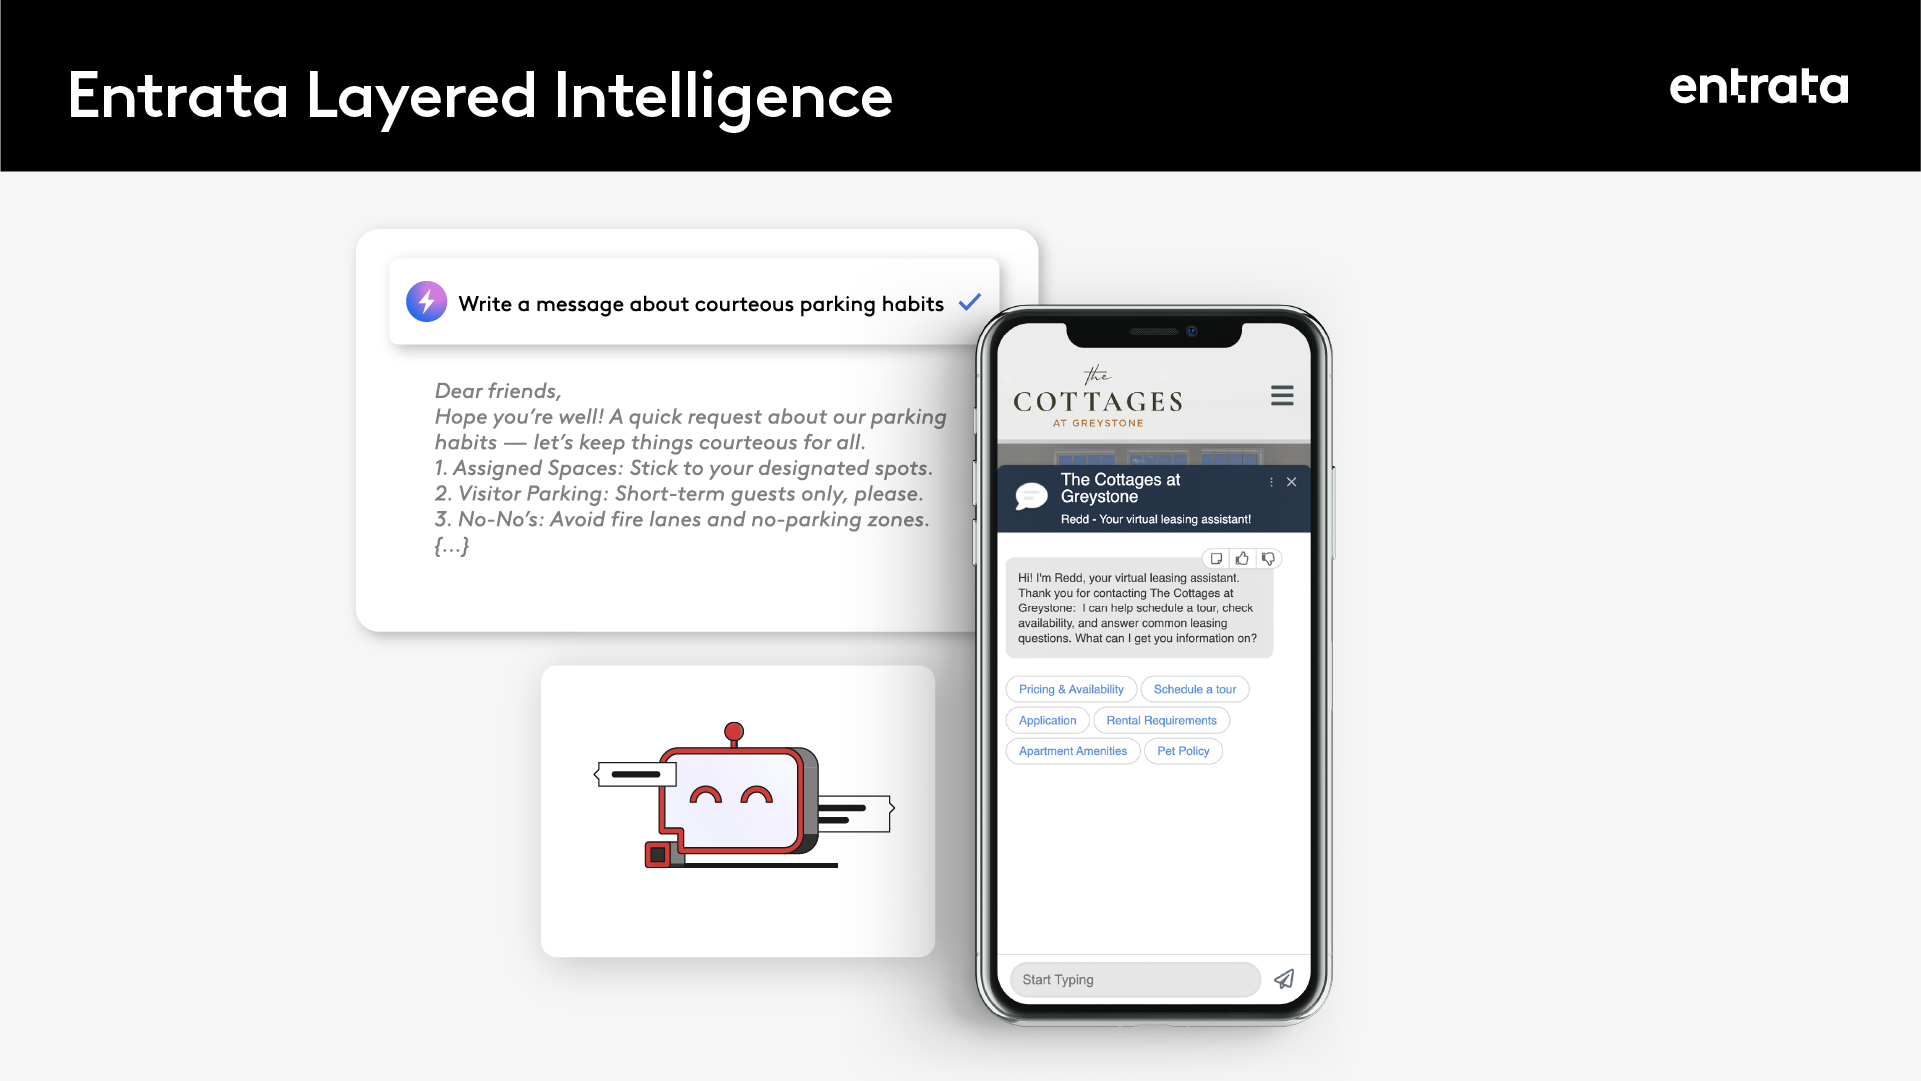 Entrata Layered Intelligence is built into existing workflows, making it easy for every team member to access and use AI. Examples include generative content for Review Management, Messages, and Blogs, as well as our AI Virtual Leasing Assistant, Redd™.
